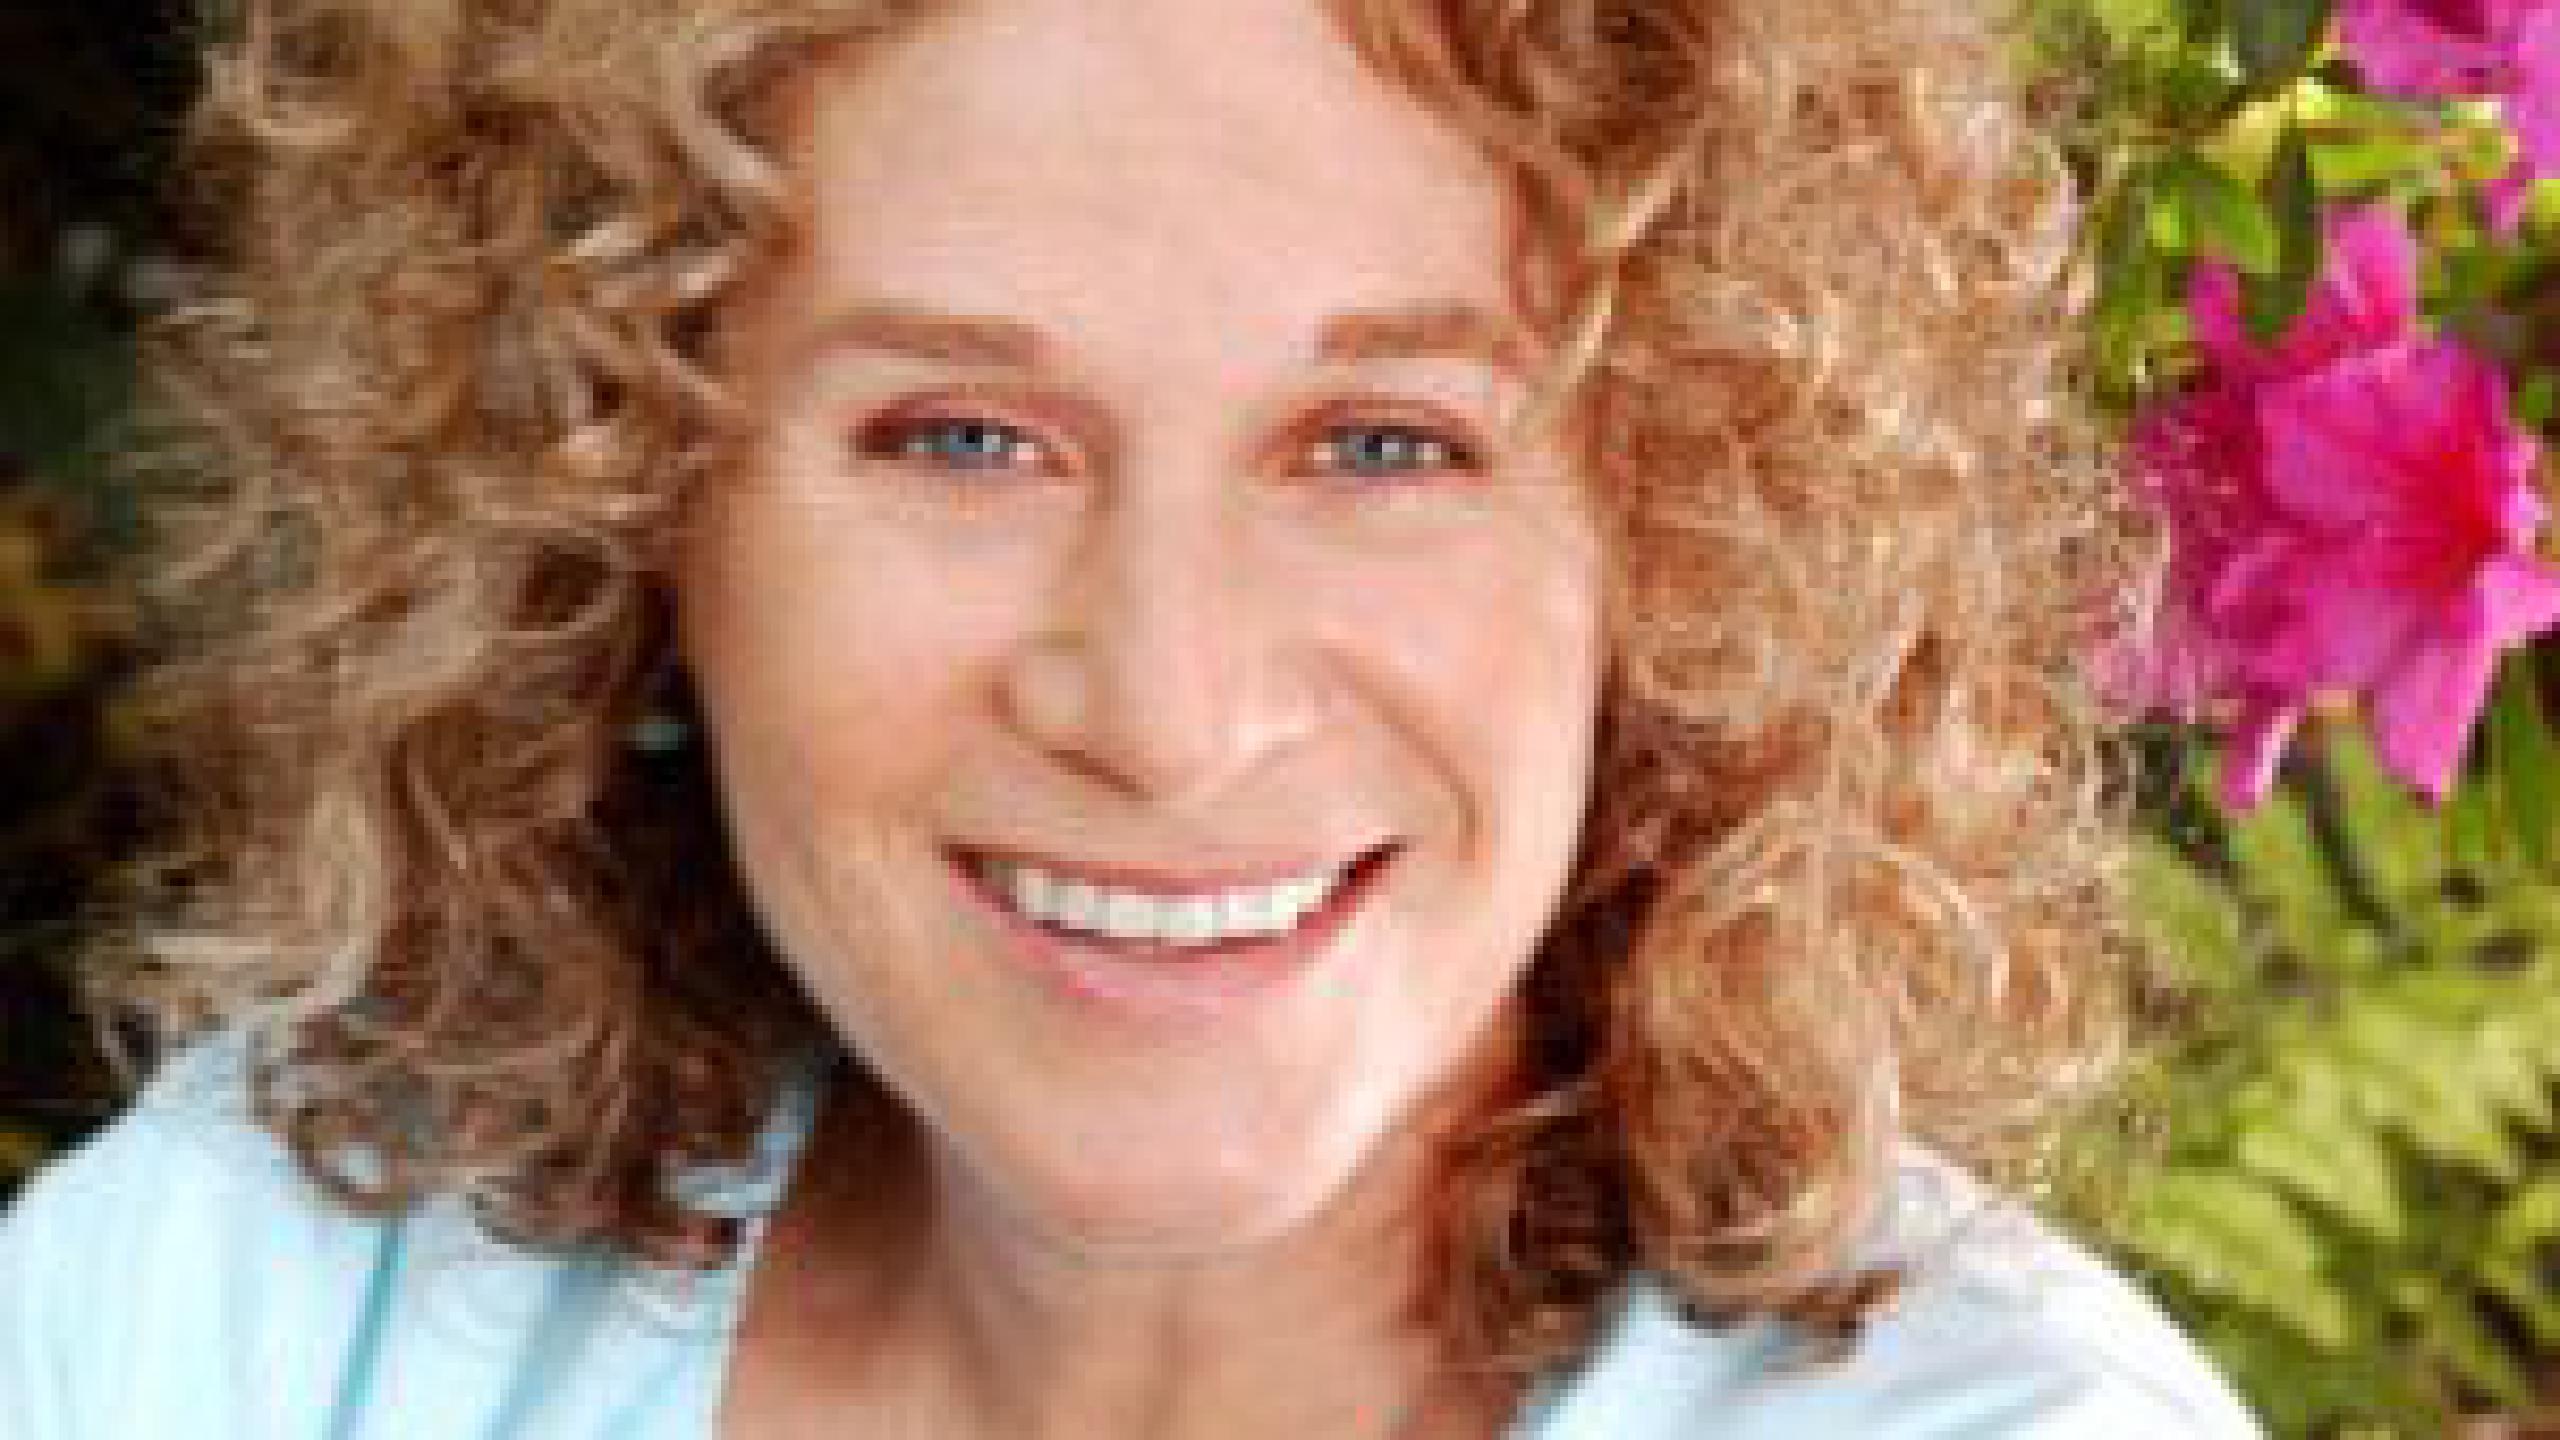 Carole King tour dates 2022 2023. Carole King tickets and concerts